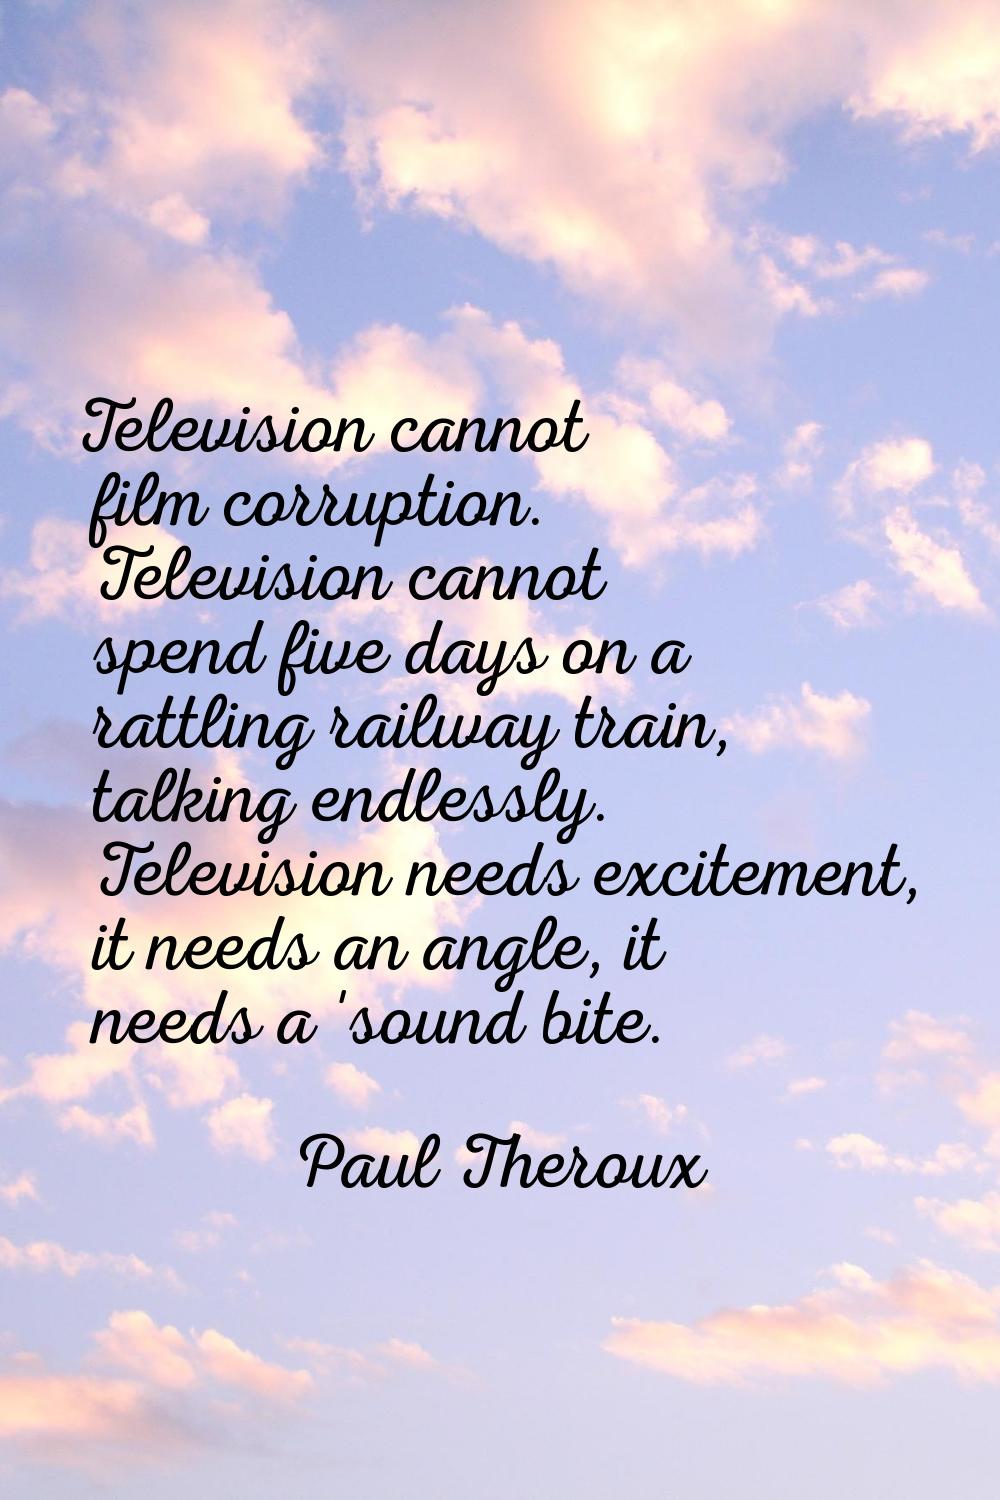 Television cannot film corruption. Television cannot spend five days on a rattling railway train, t